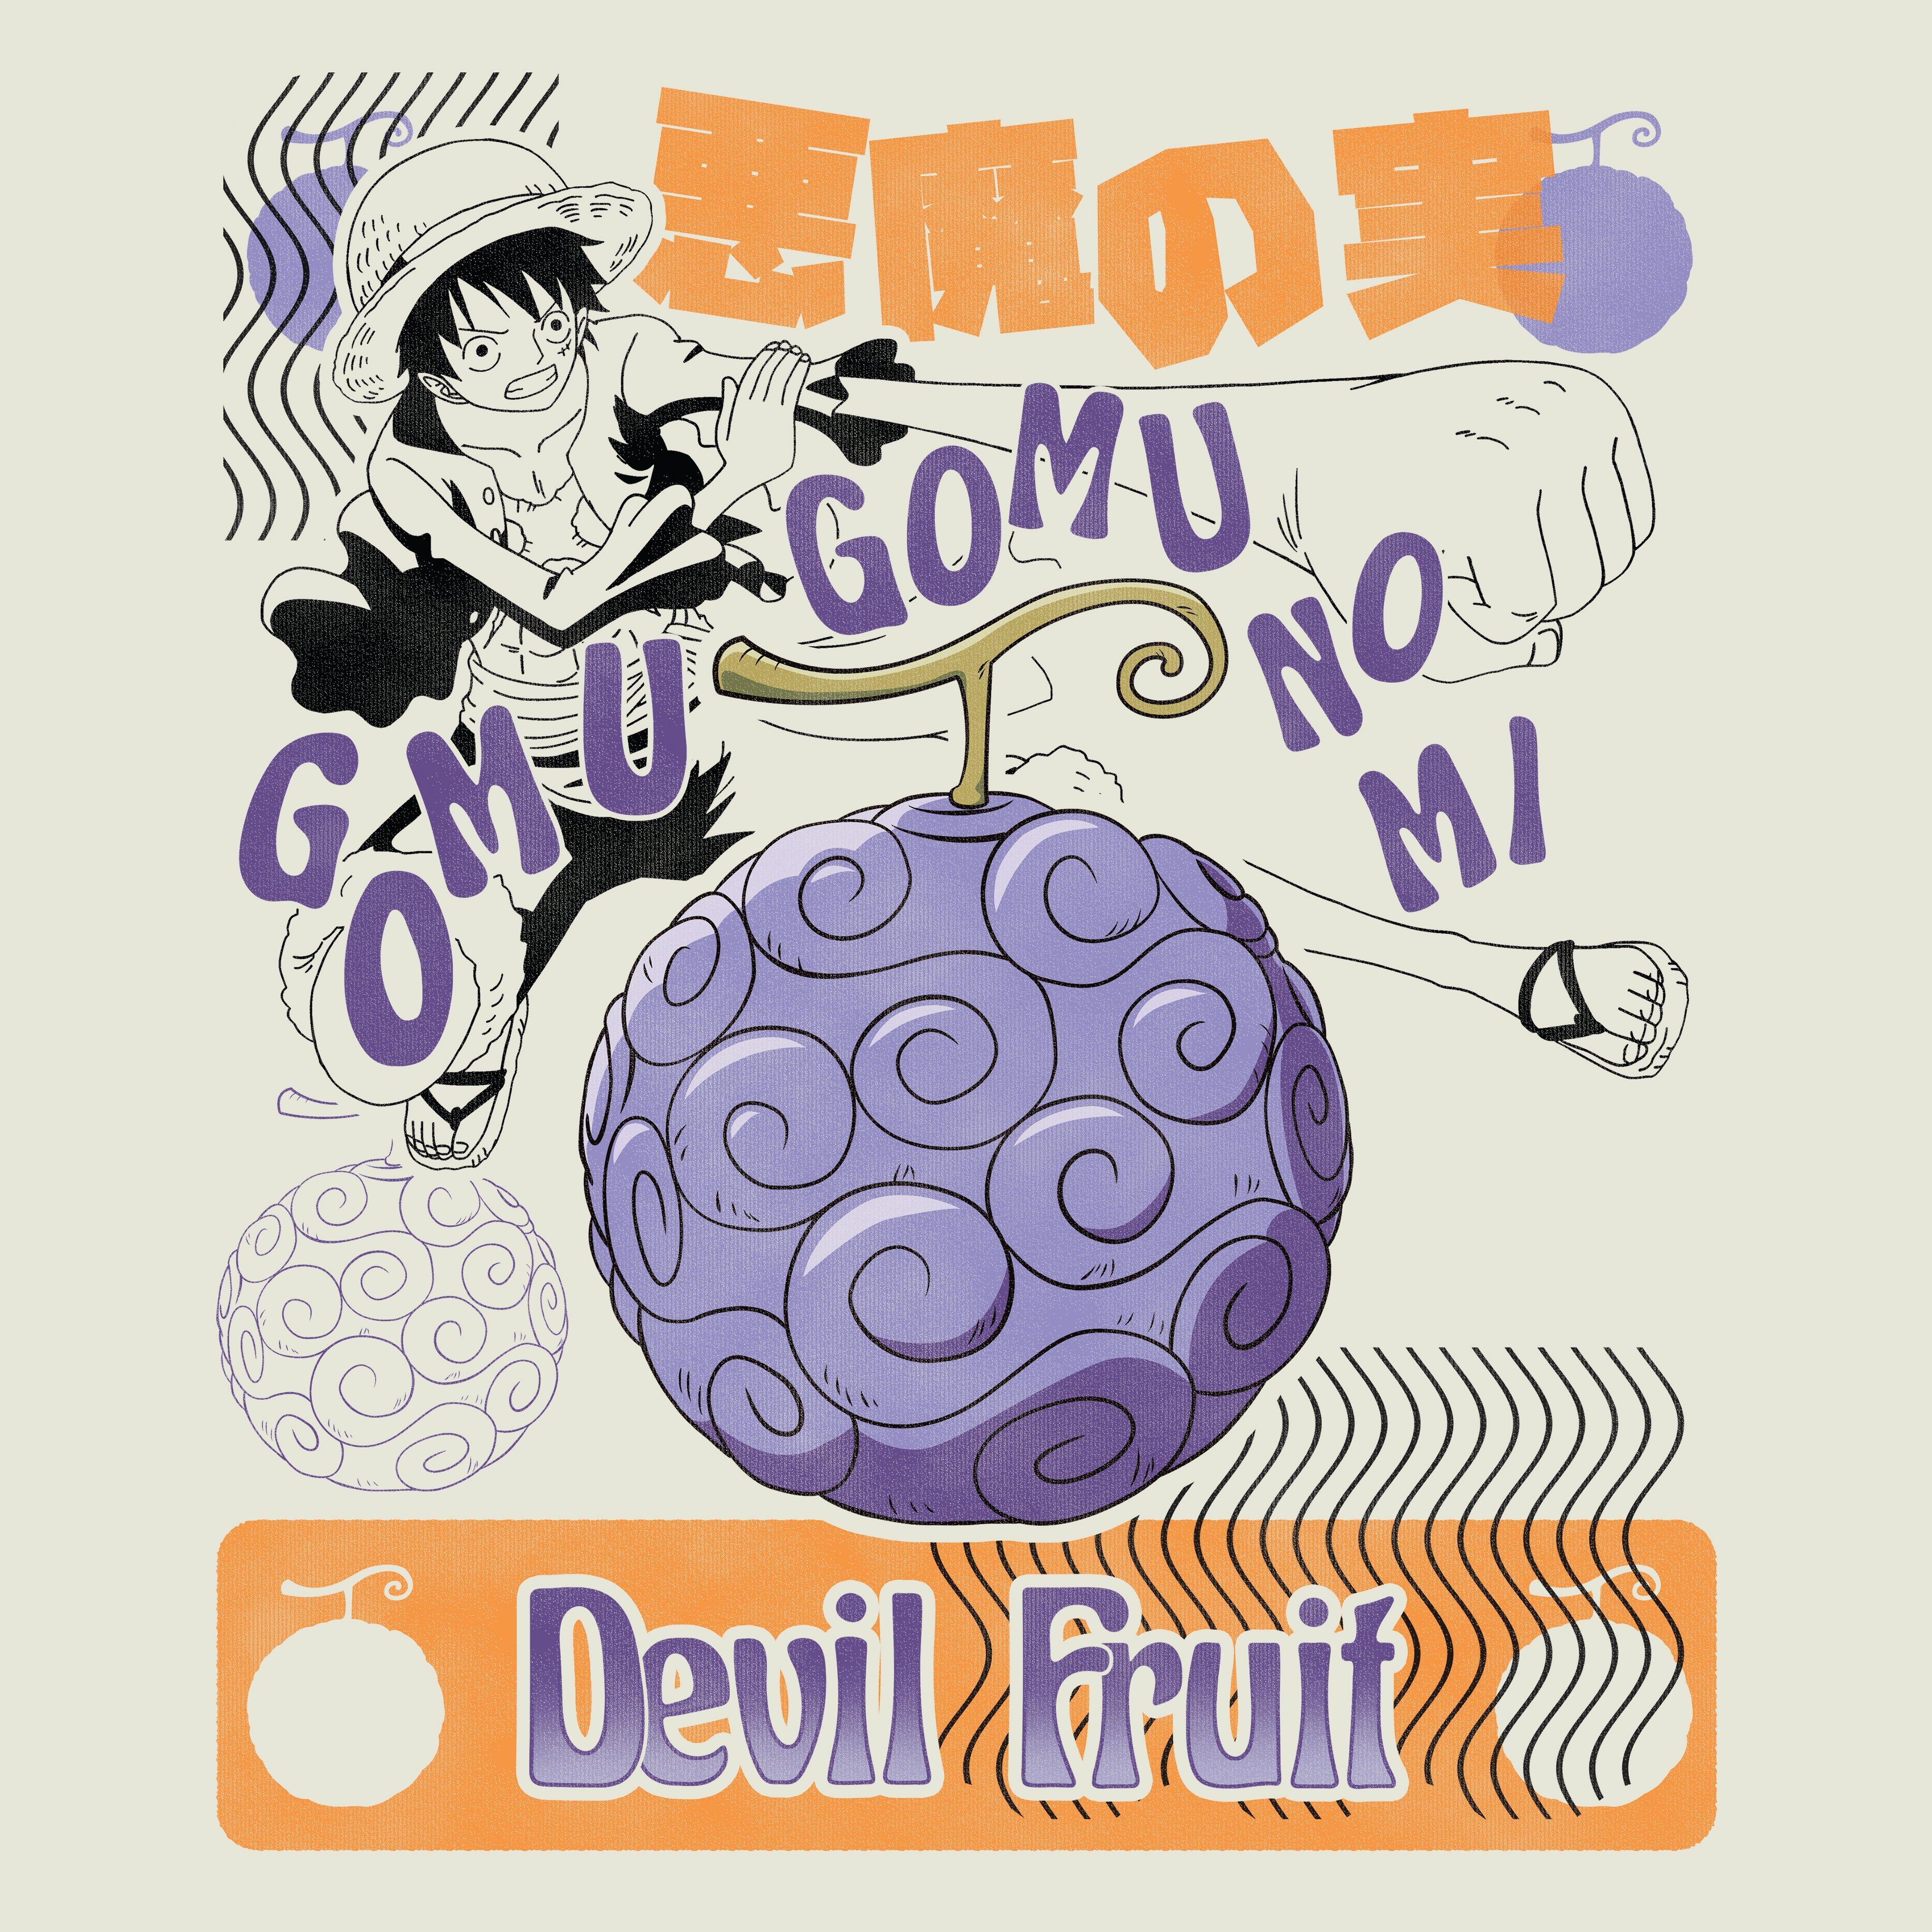 In One Piece, what are the different devil fruits and what